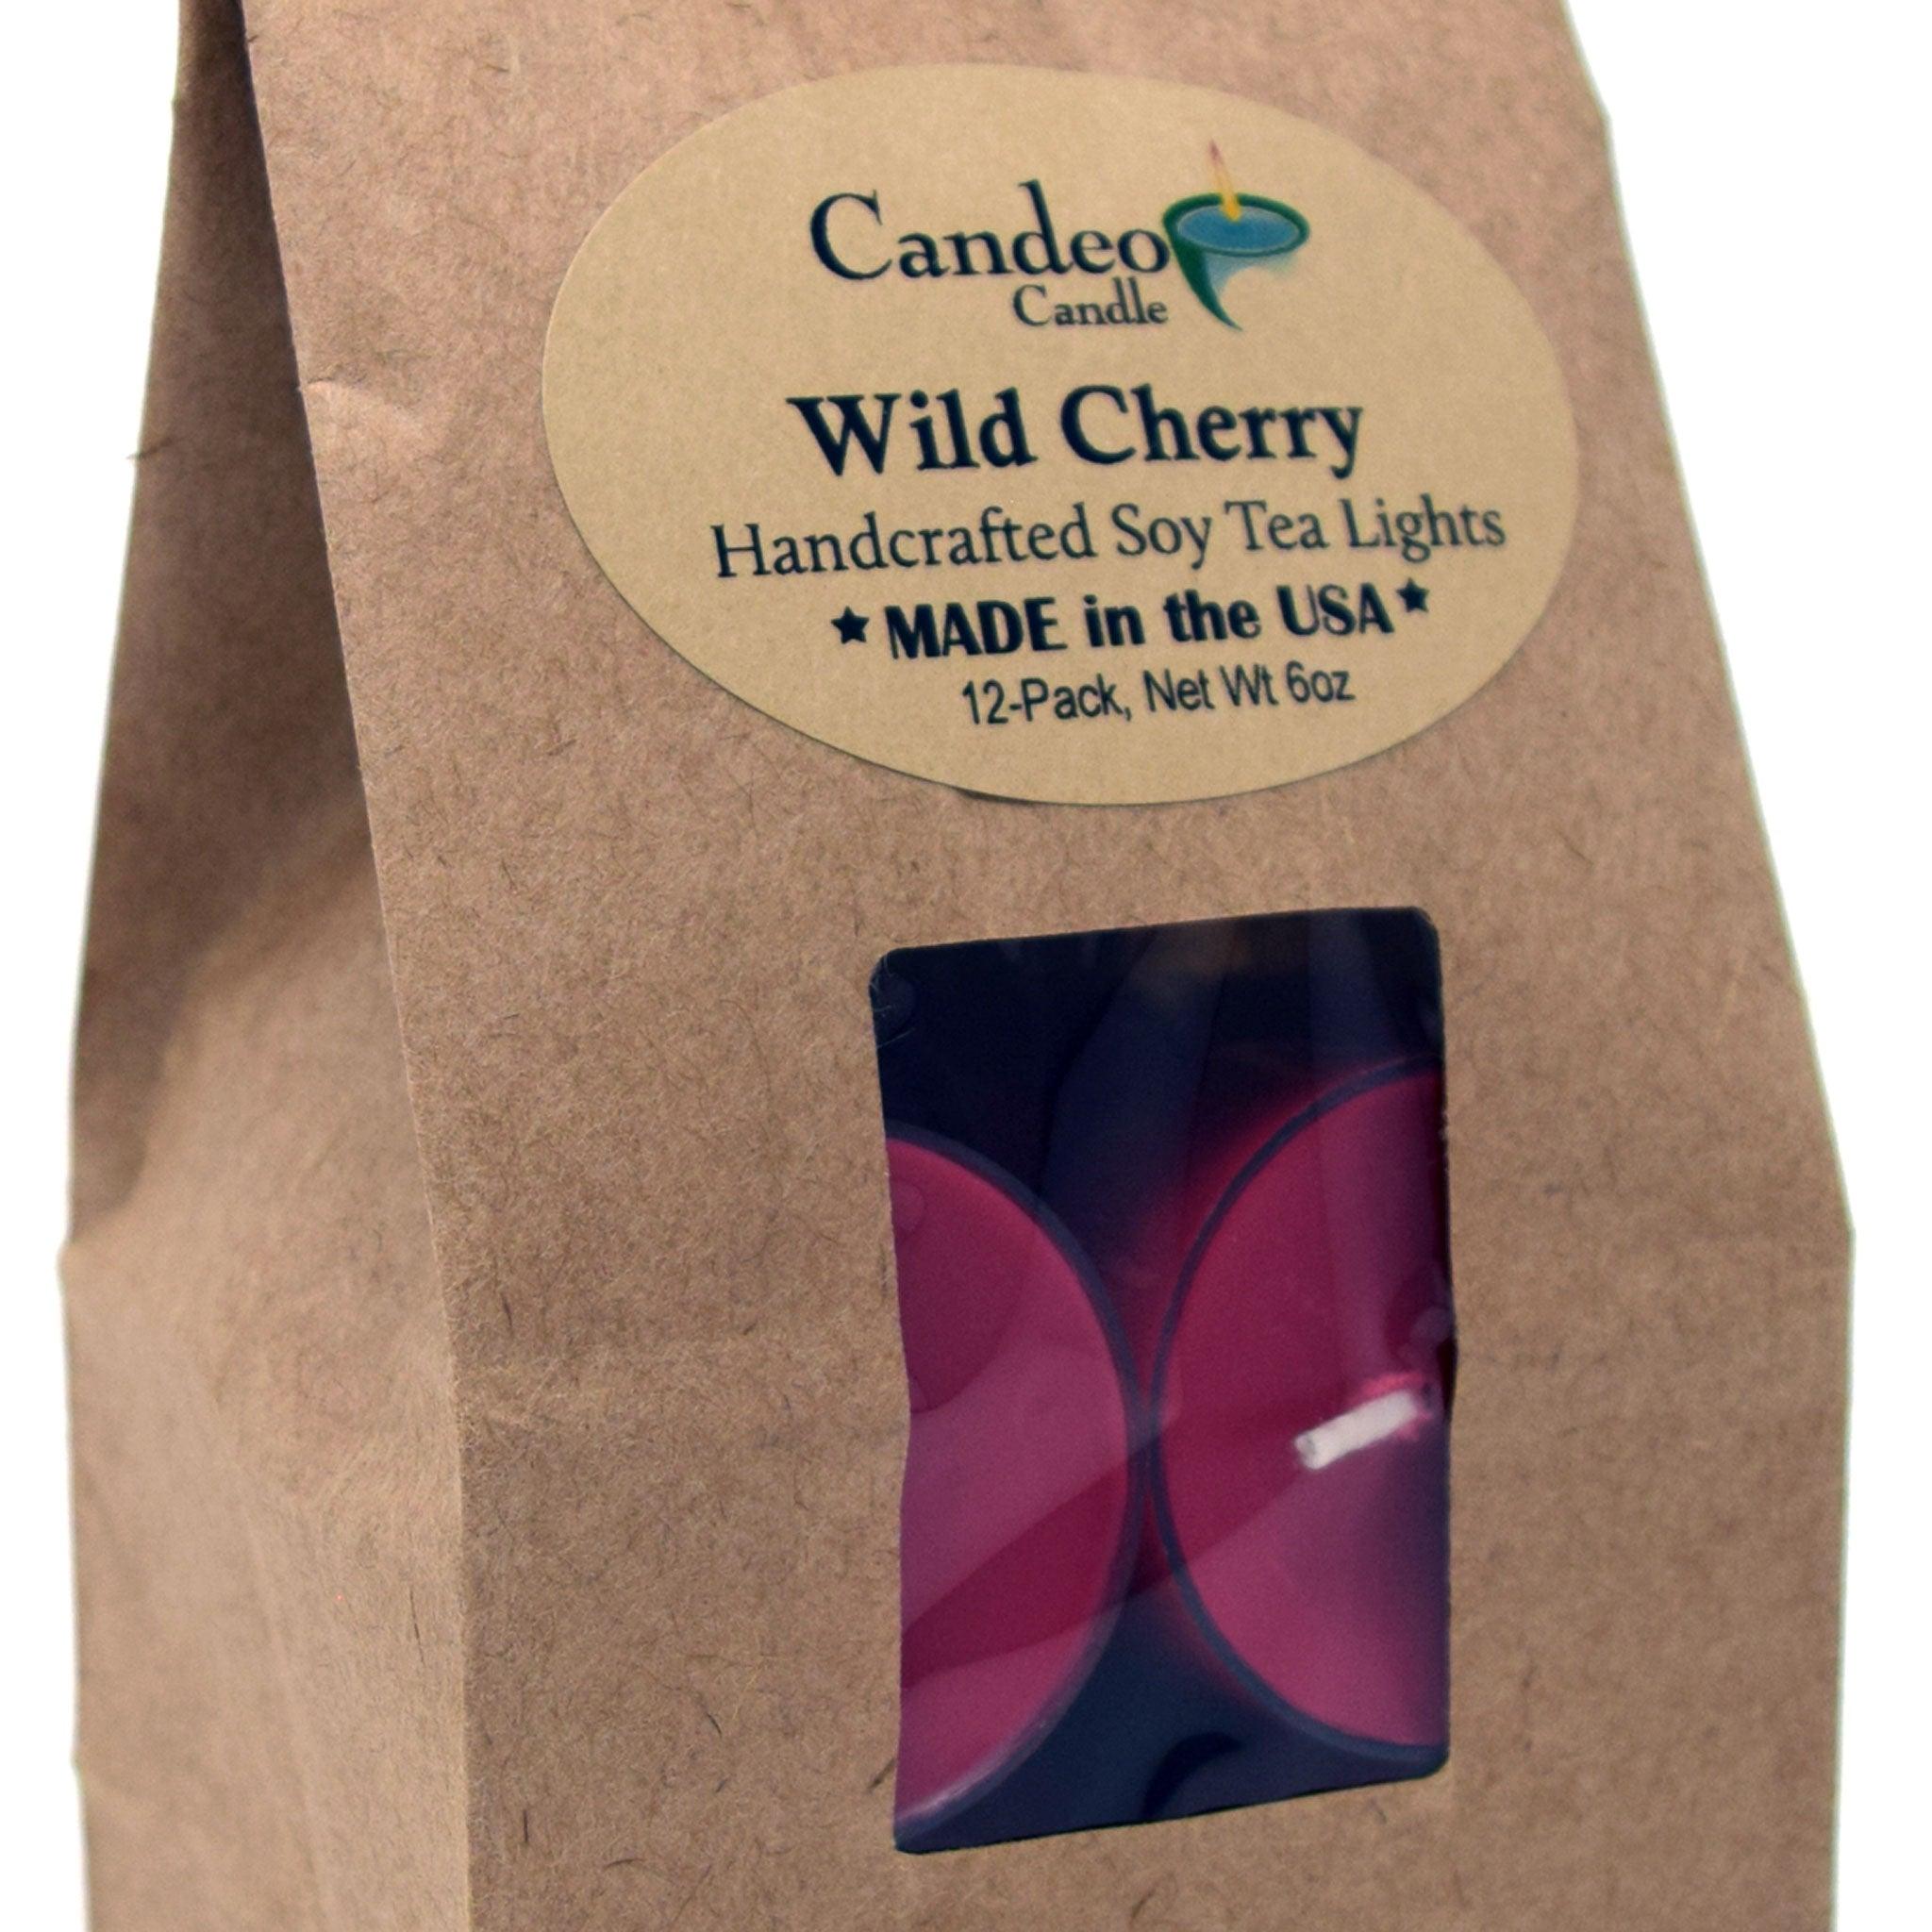 Wild Cherry, Soy Tea Light 12-Pack - Candeo Candle